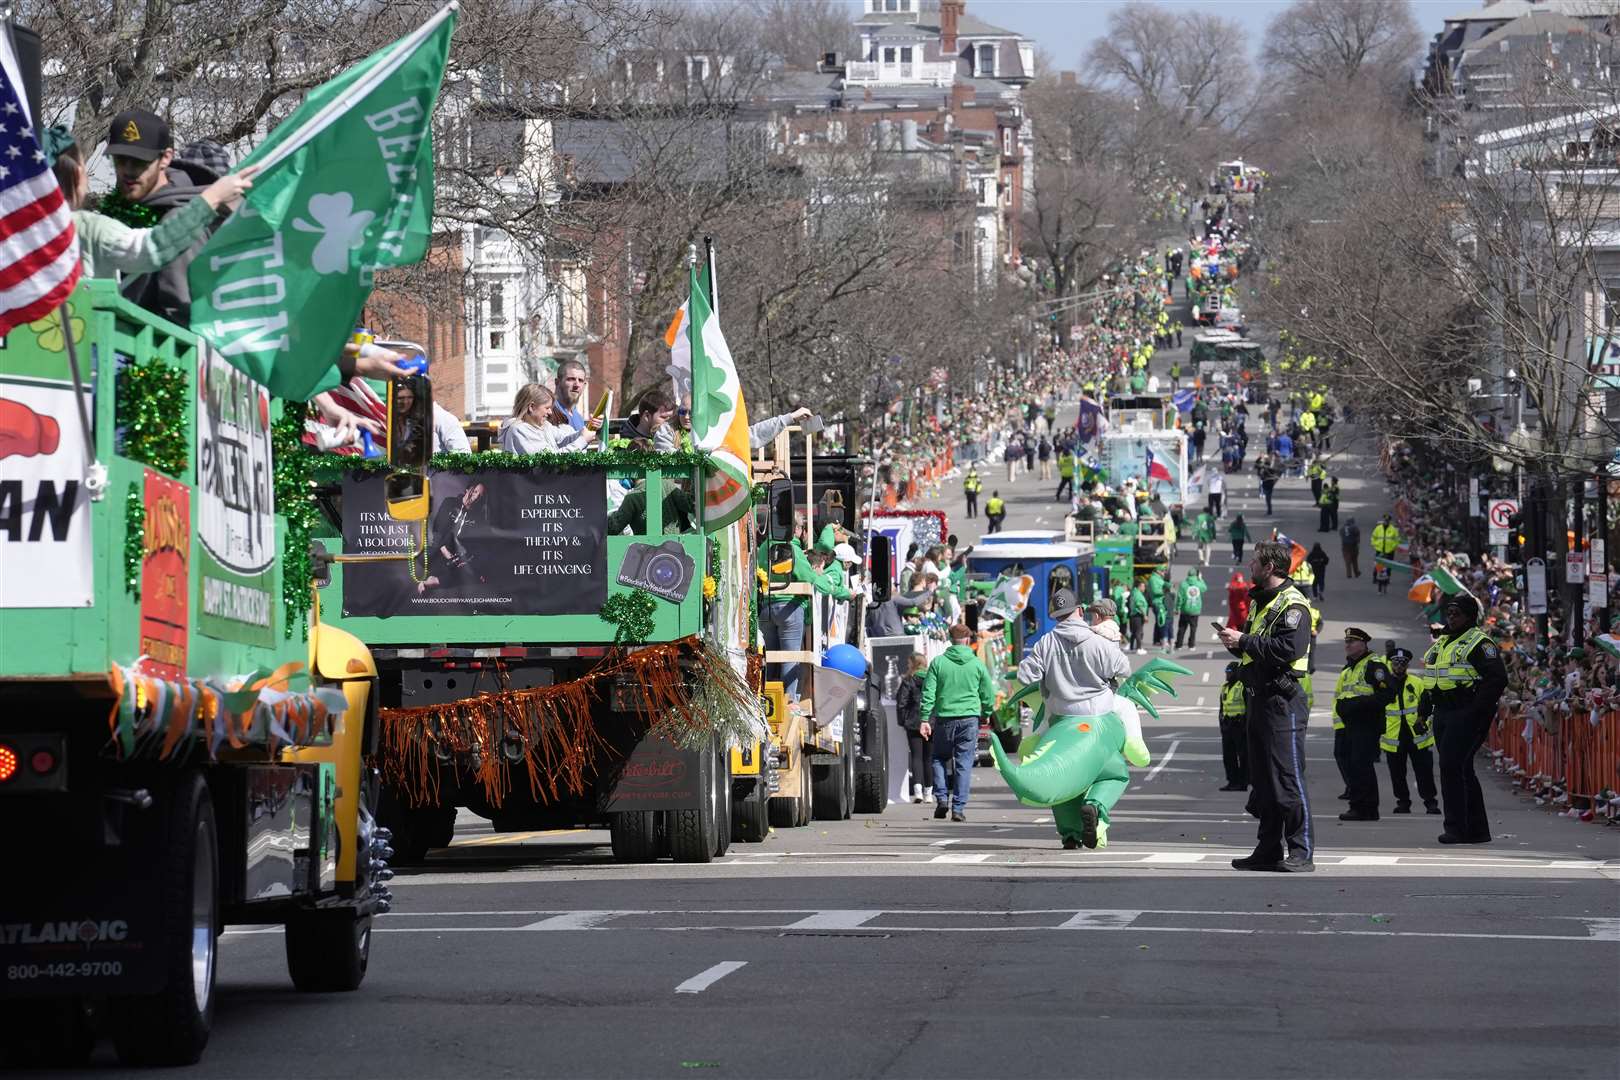 Floats and vehicles make their way along the parade route as spectators watch the St Patrick’s Day parade in Boston, US (Steven Senne/AP)